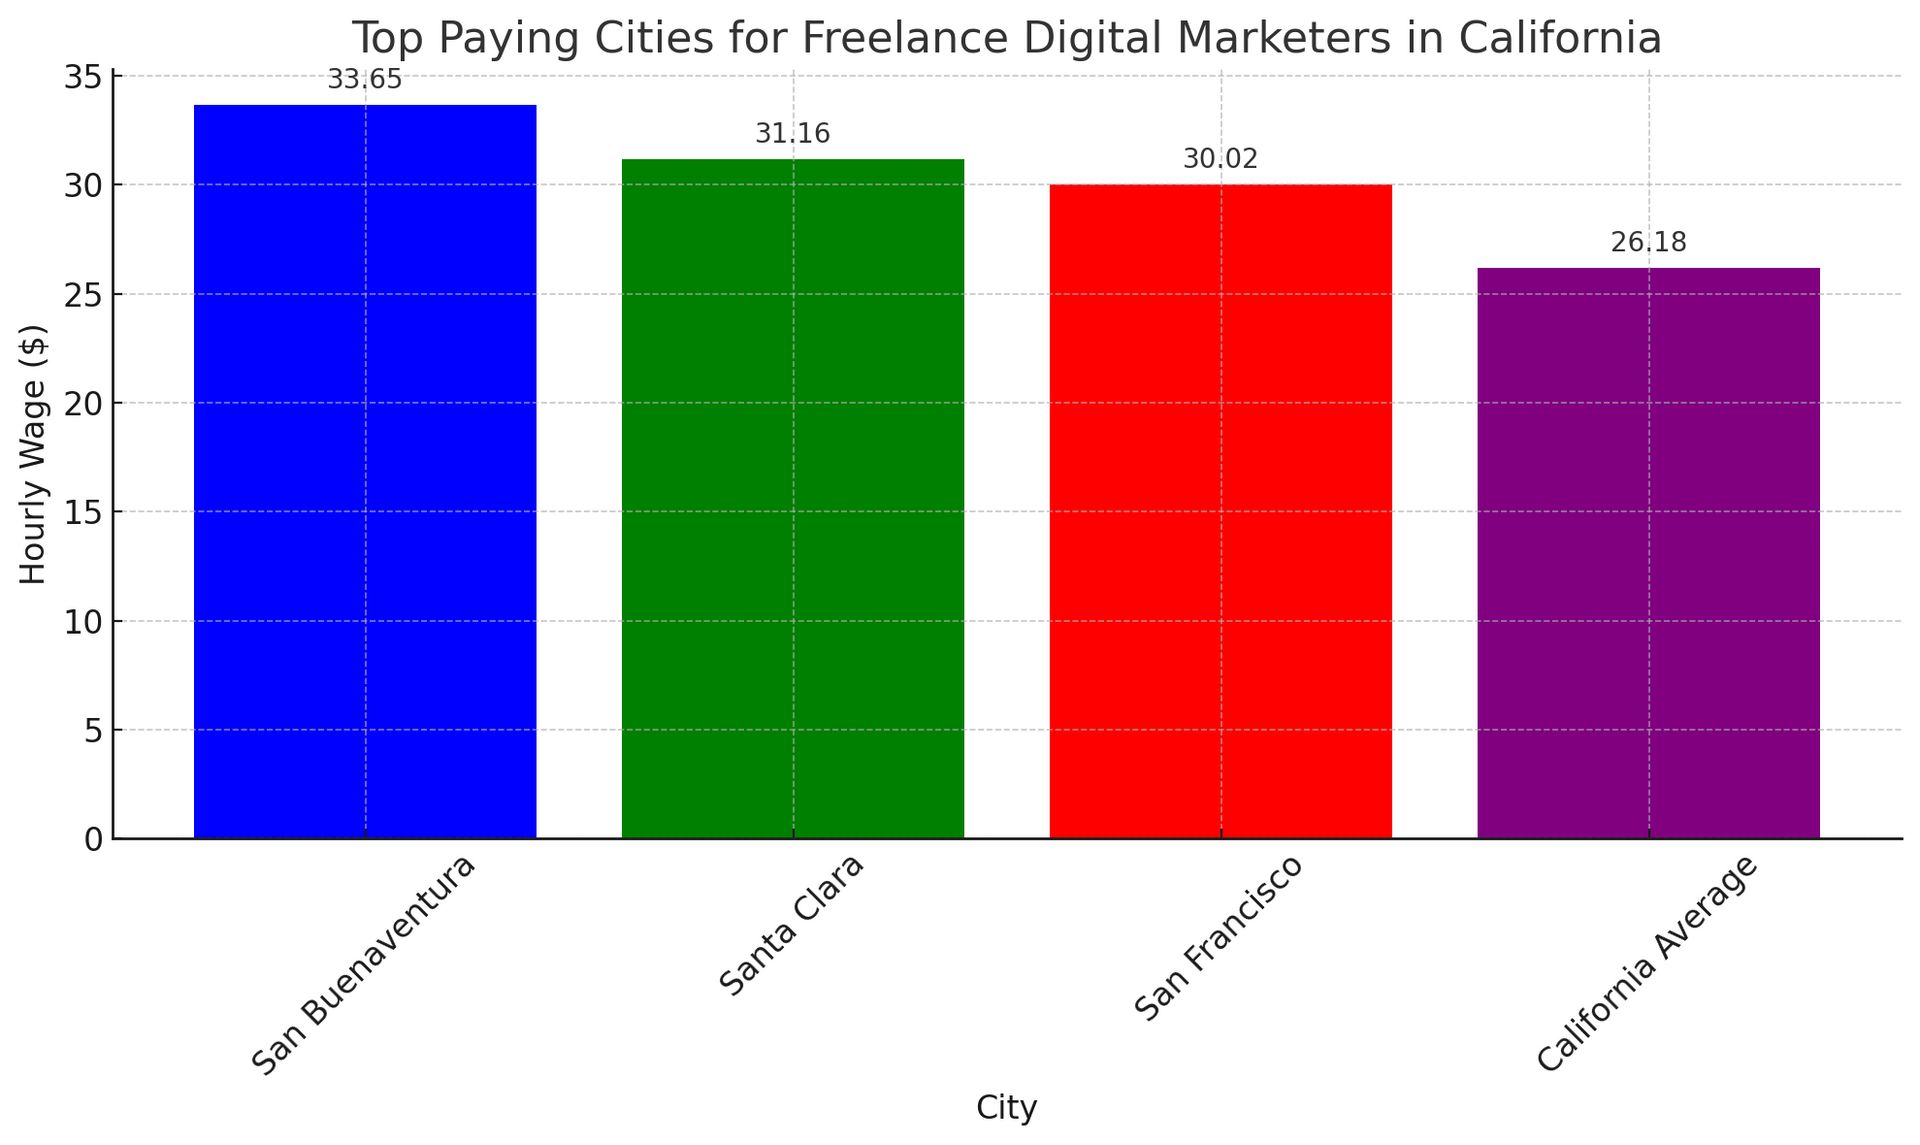 A graph showing the top paying cities for freelance digital marketers in california